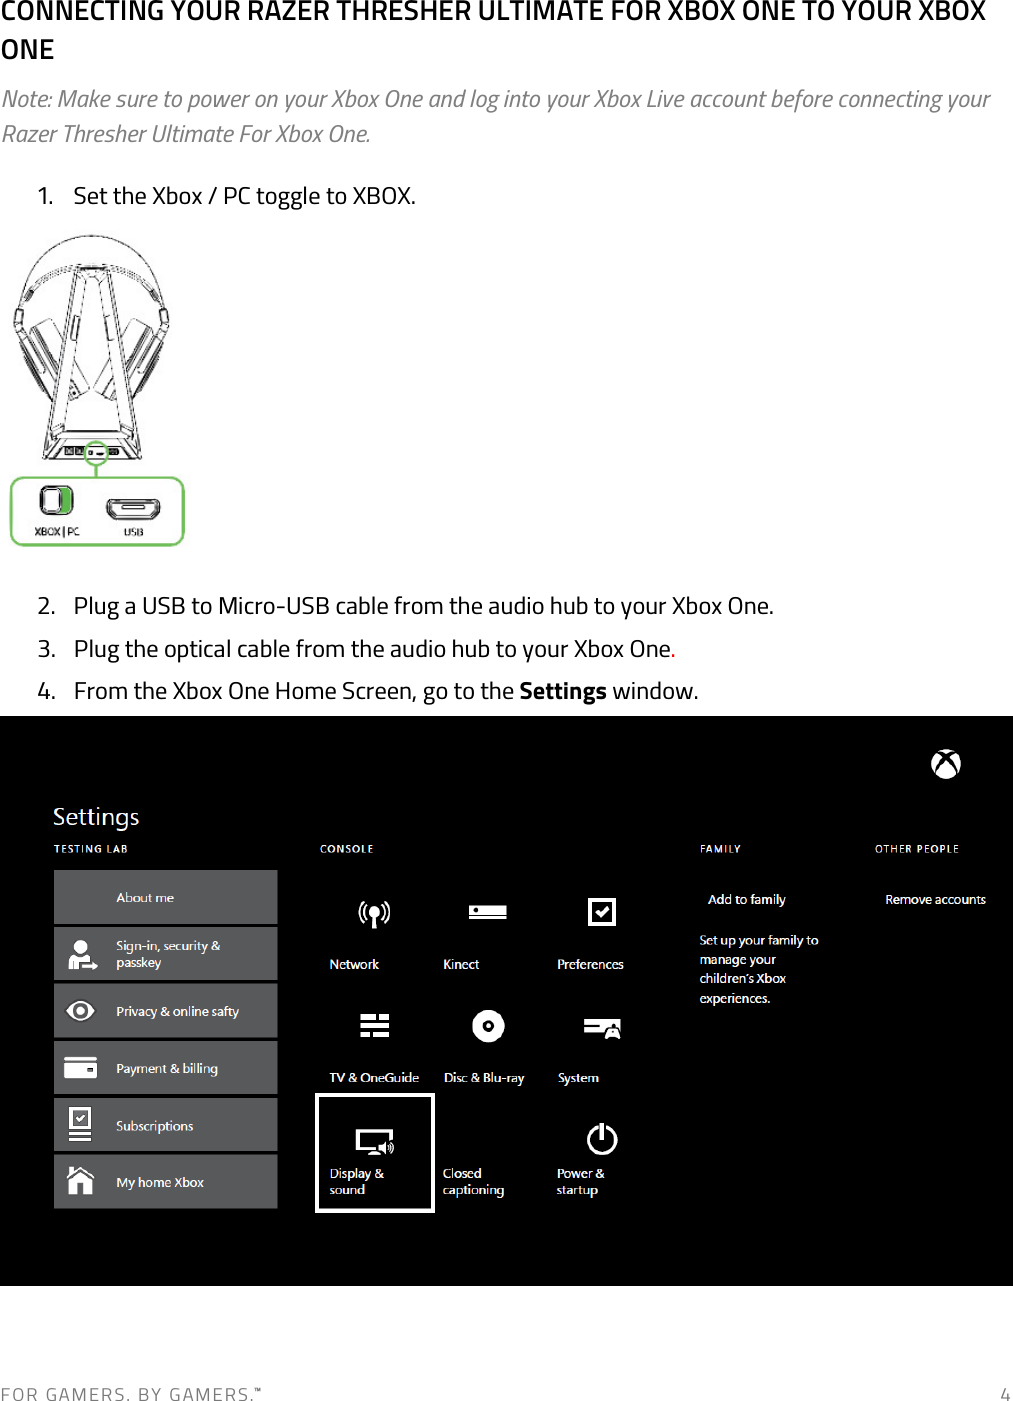 F O R   G A M E R S .   B Y   G AM E R S .™   4 CONNECTING YOUR RAZER THRESHER ULTIMATE FOR XBOX ONE TO YOUR XBOX ONE Note: Make sure to power on your Xbox One and log into your Xbox Live account before connecting your Razer Thresher Ultimate For Xbox One.  1. Set the Xbox / PC toggle to XBOX.  2. Plug a USB to Micro-USB cable from the audio hub to your Xbox One.  3. Plug the optical cable from the audio hub to your Xbox One.   4. From the Xbox One Home Screen, go to the Settings window.   